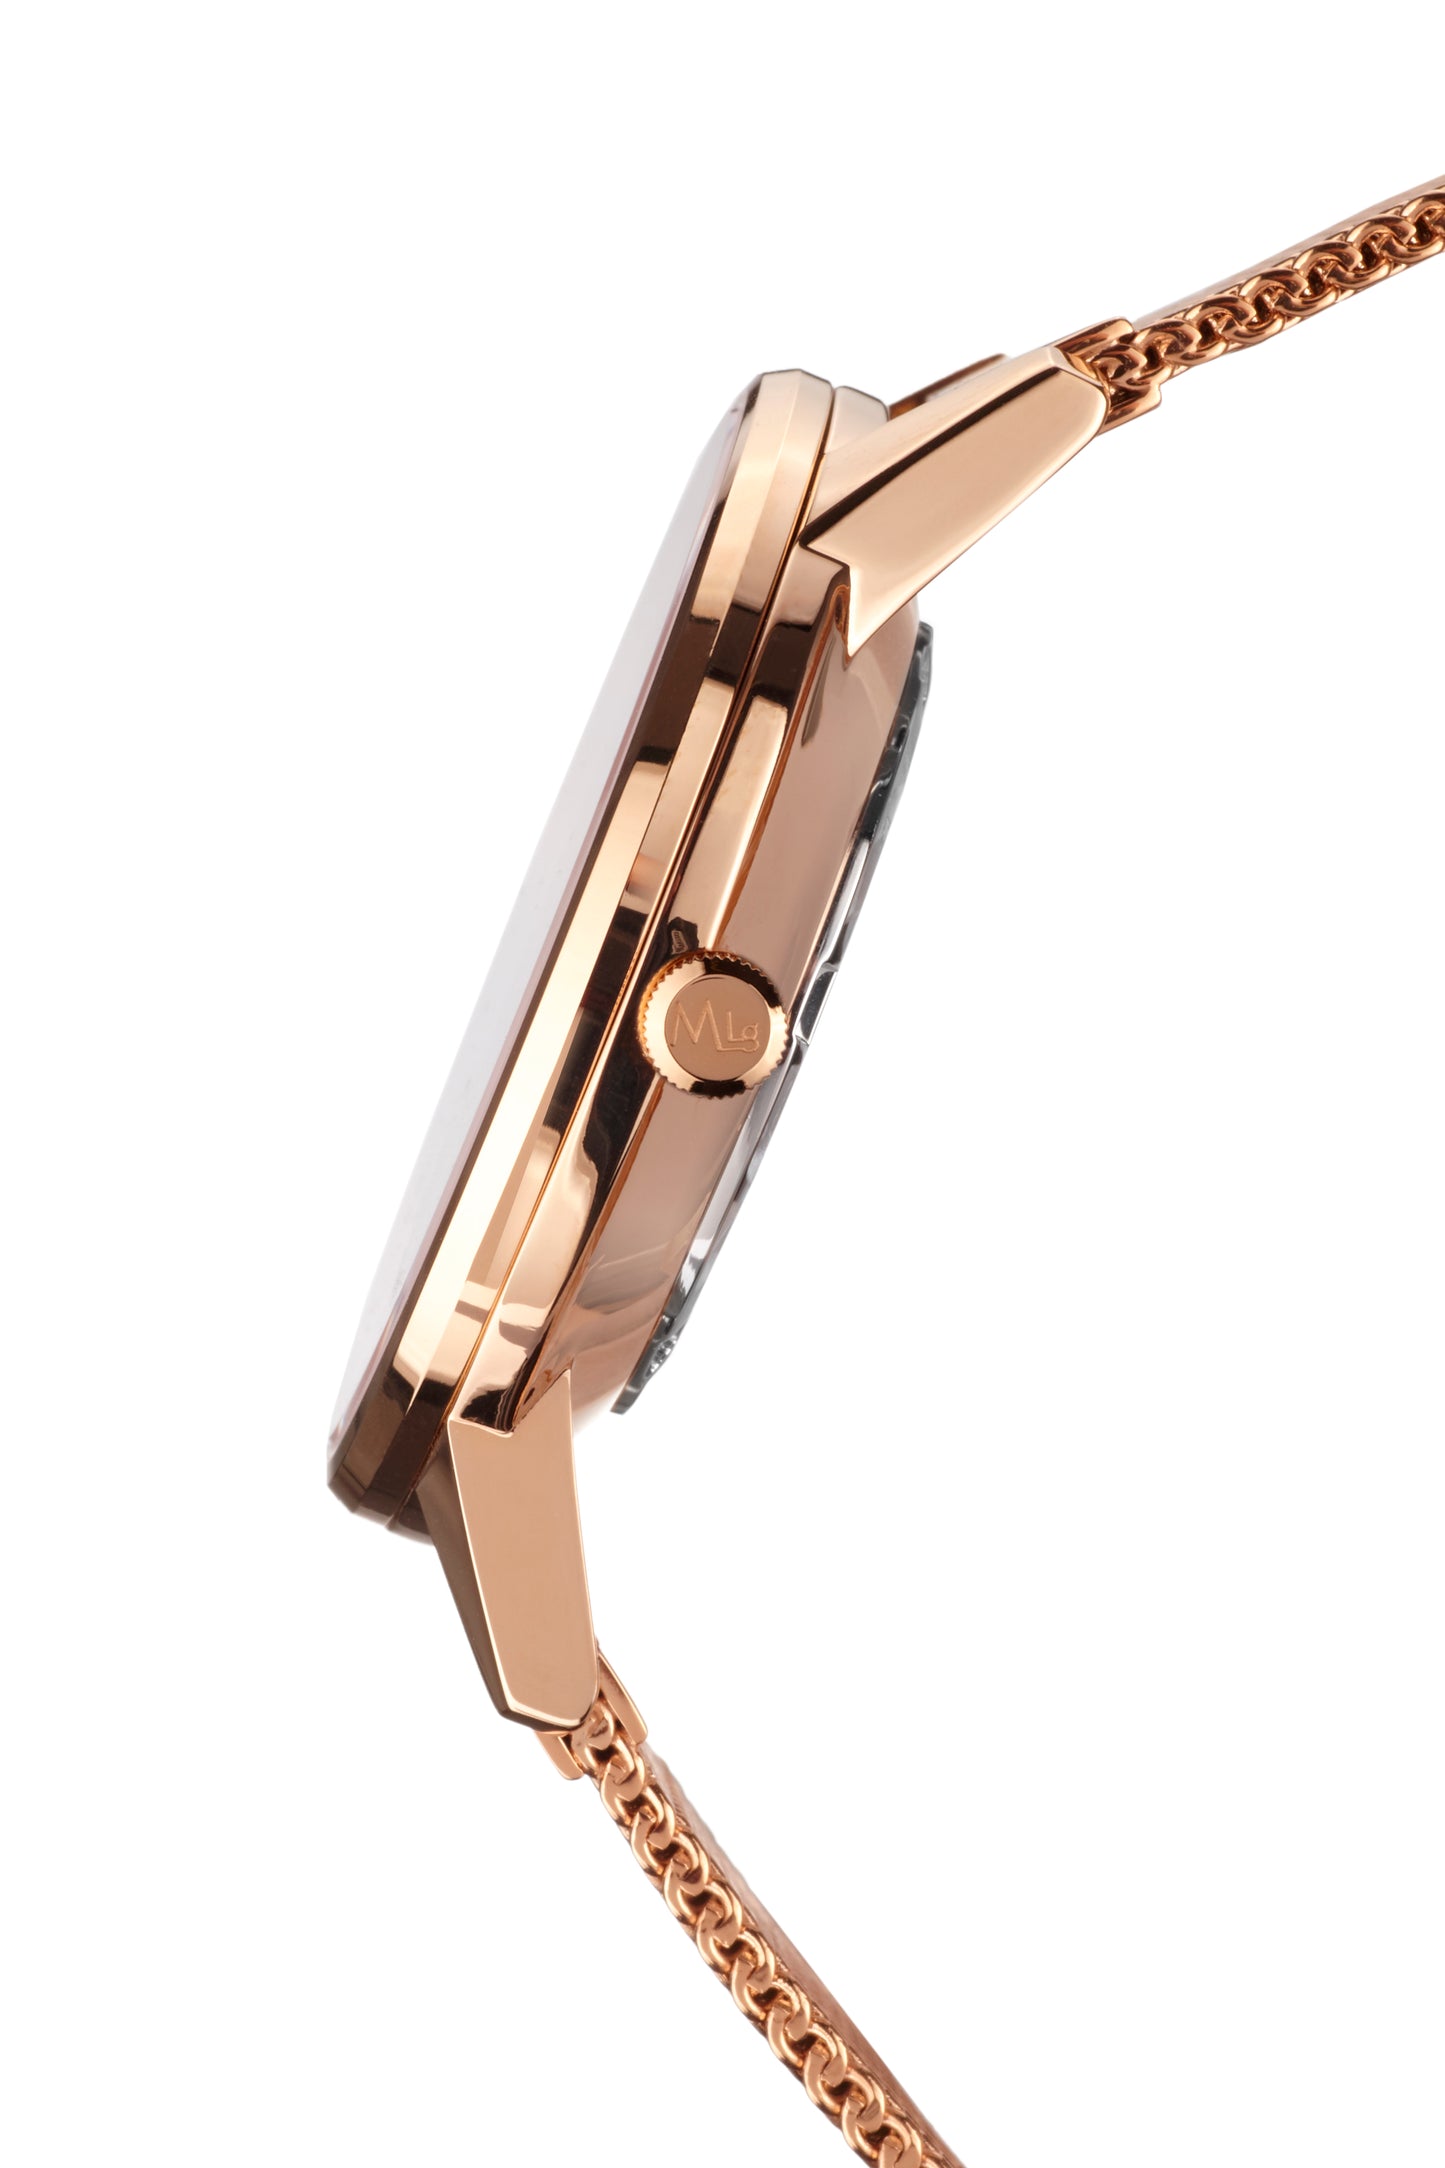 Automatic watches — Galantine — Mathieu Legrand — rosegold IP white mother of pearl